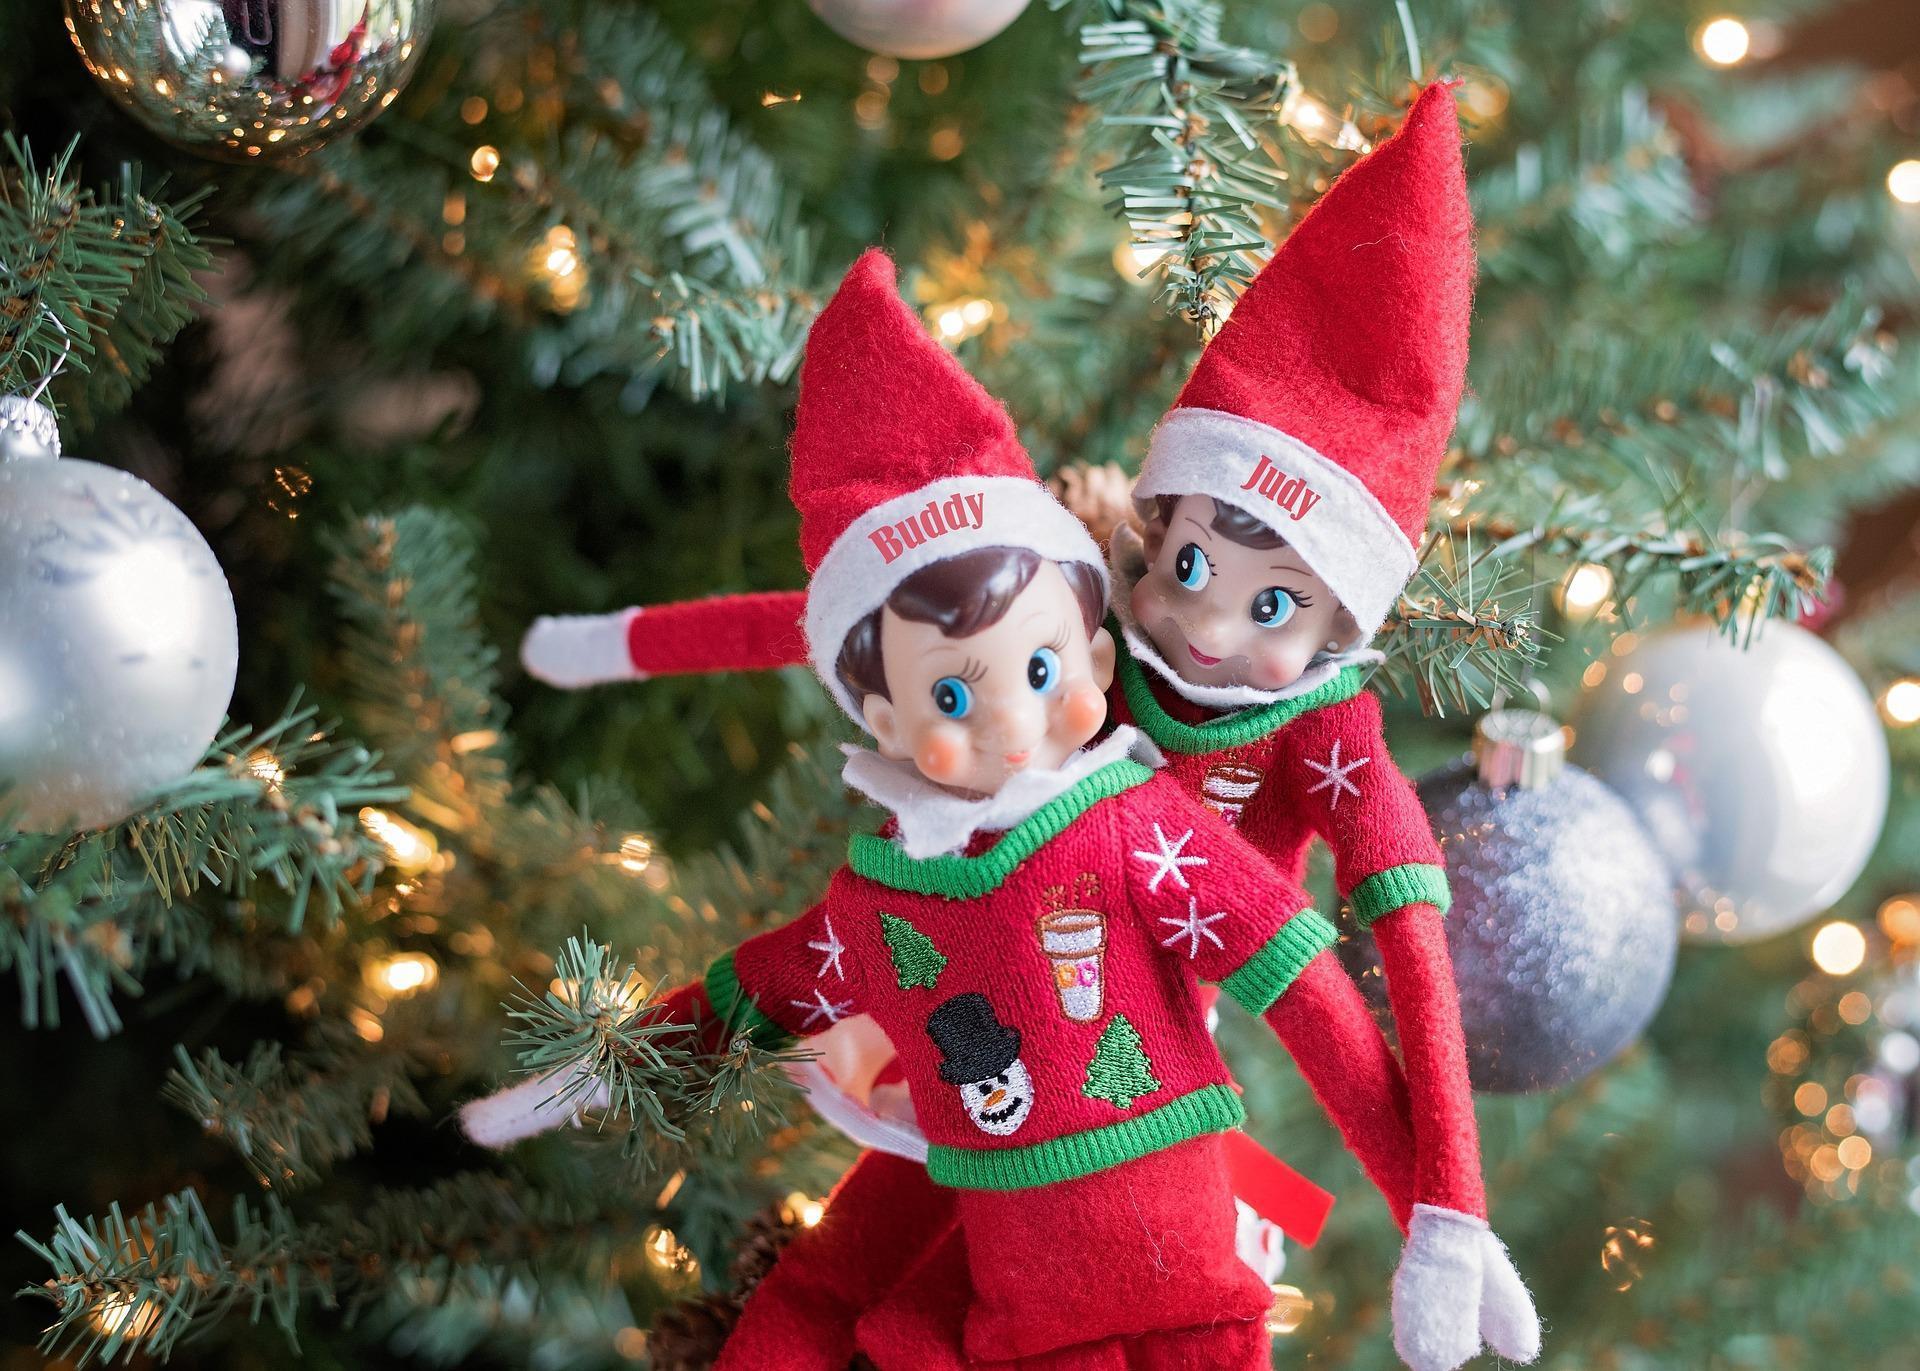 How Does Elf On The Shelf Work? A Simple Guide For Parents